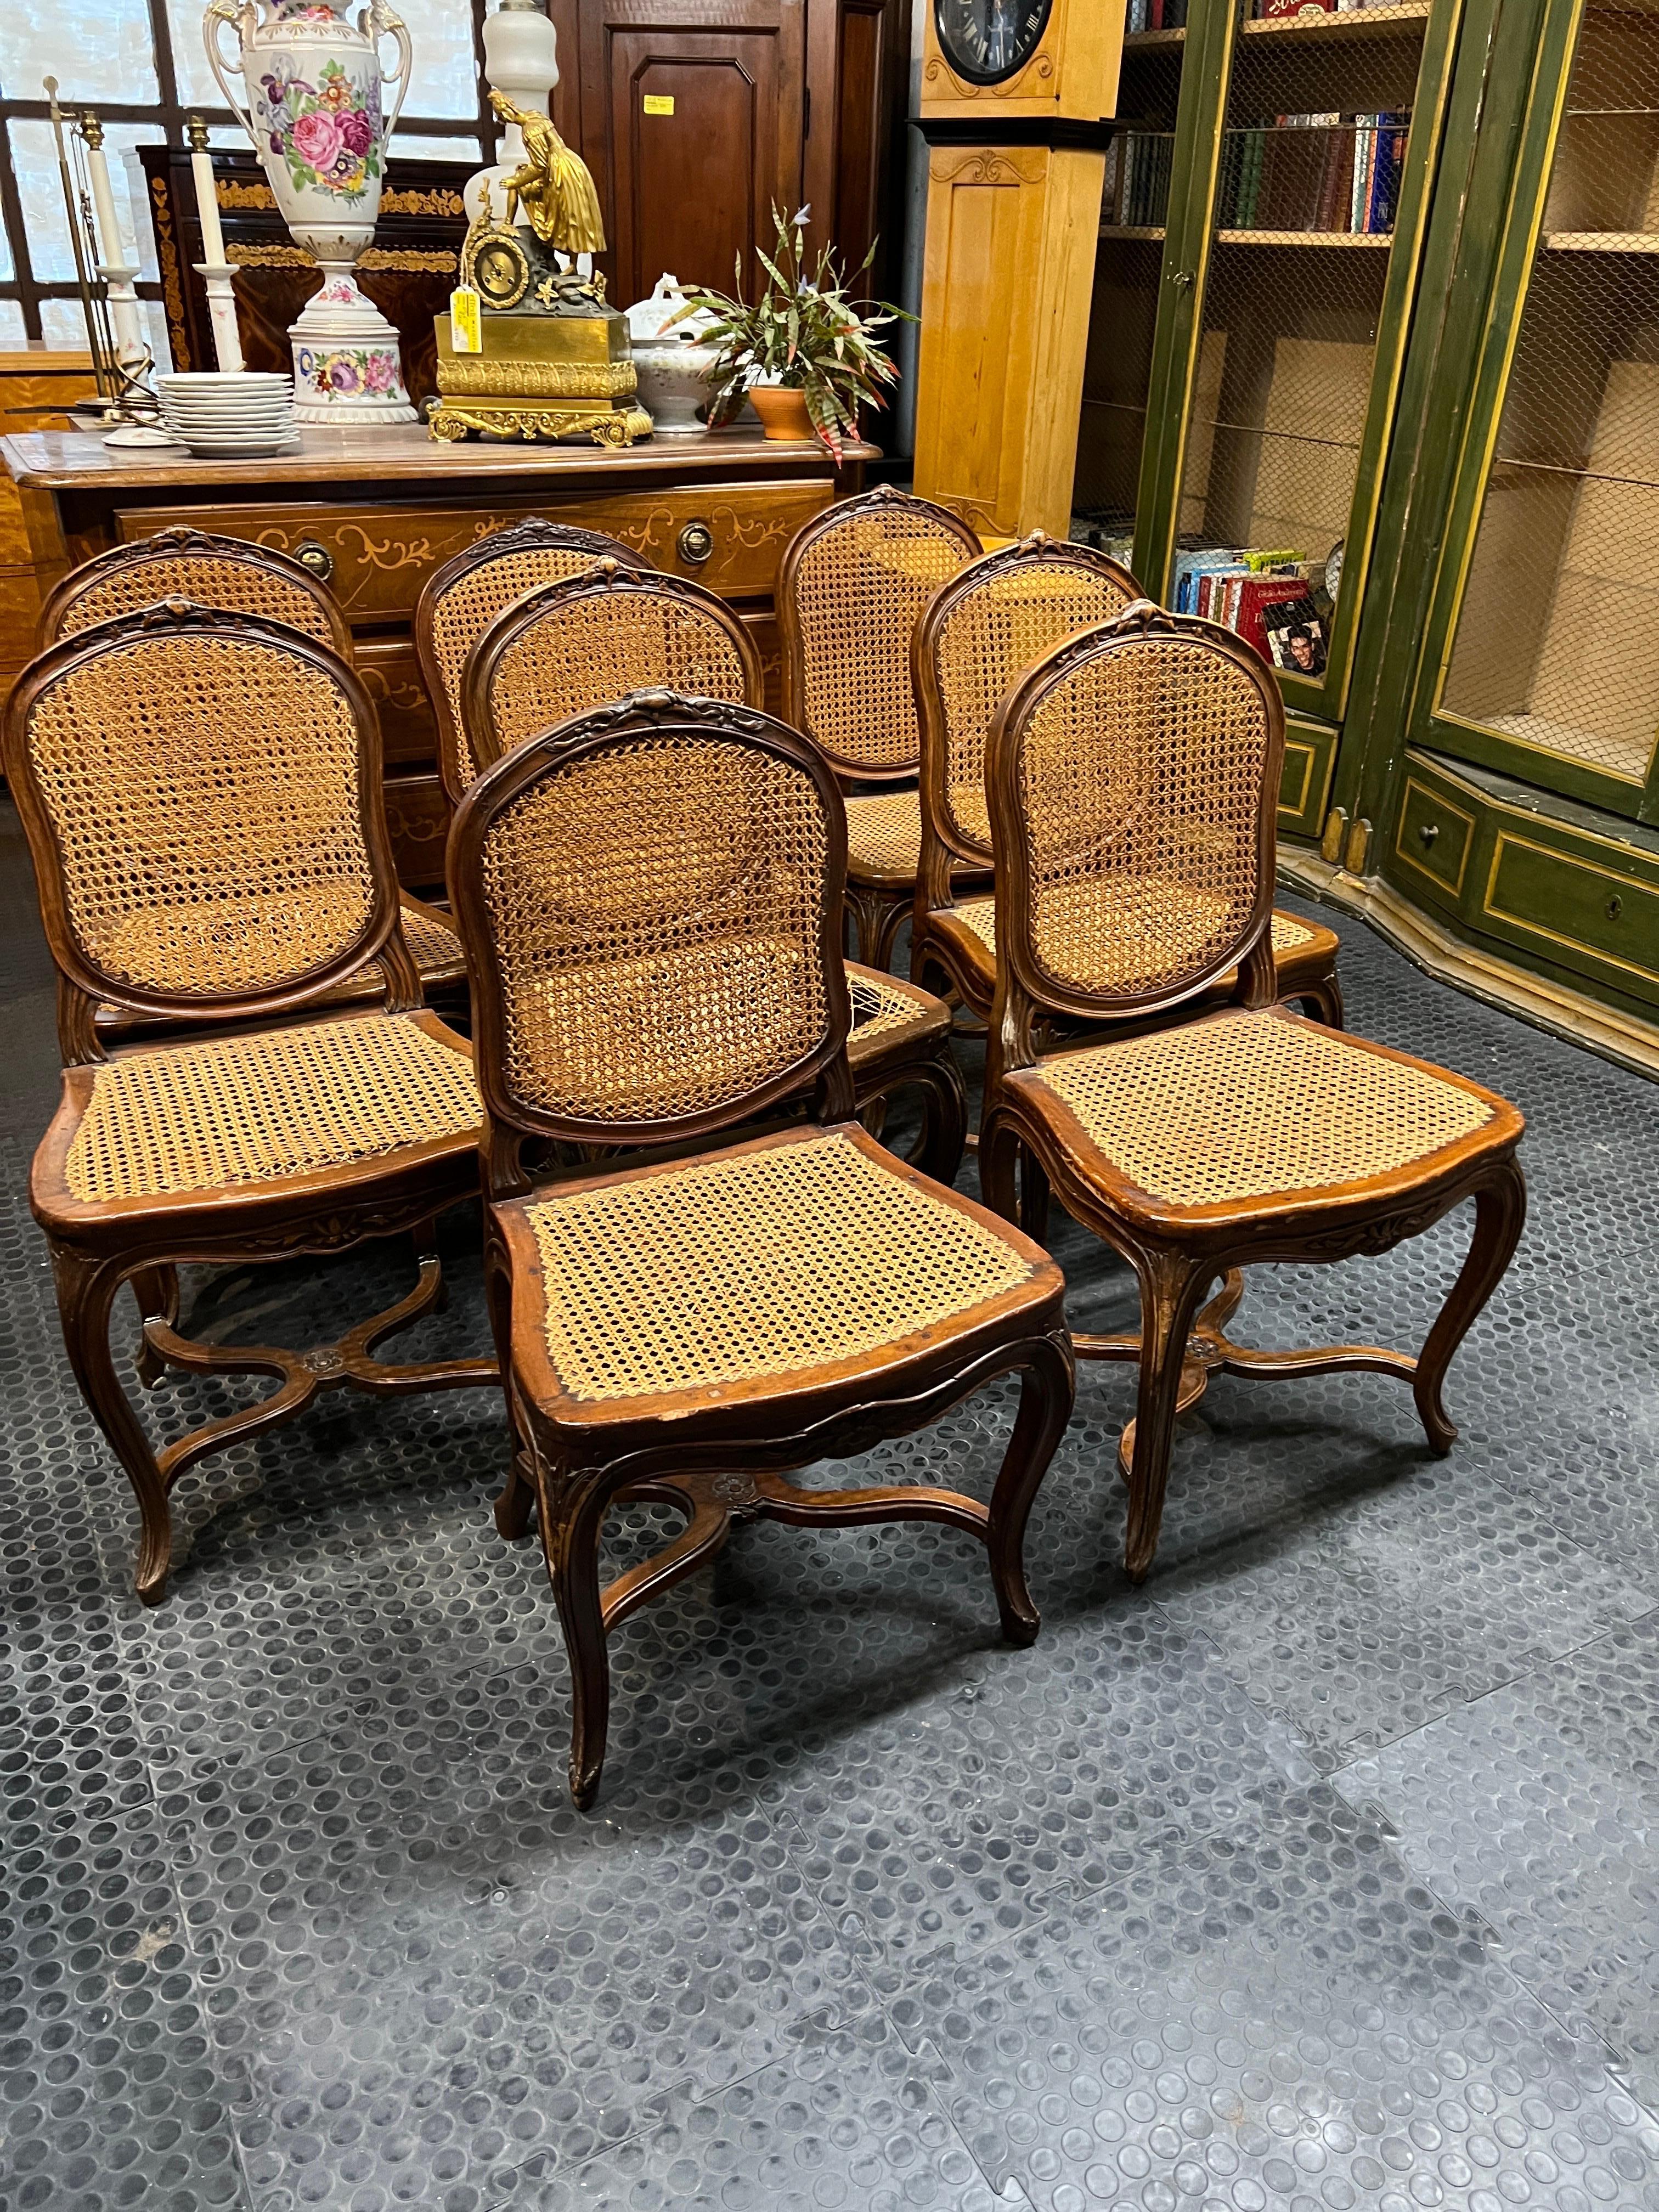 Fantastic group of 8 French Provençal chairs, finely hand-carved and with straw seats. Curved legs and floral carvings, of excellent proportions and still in patina, two chairs have the straw to be arranged.
Signed with hot stamping under one of the